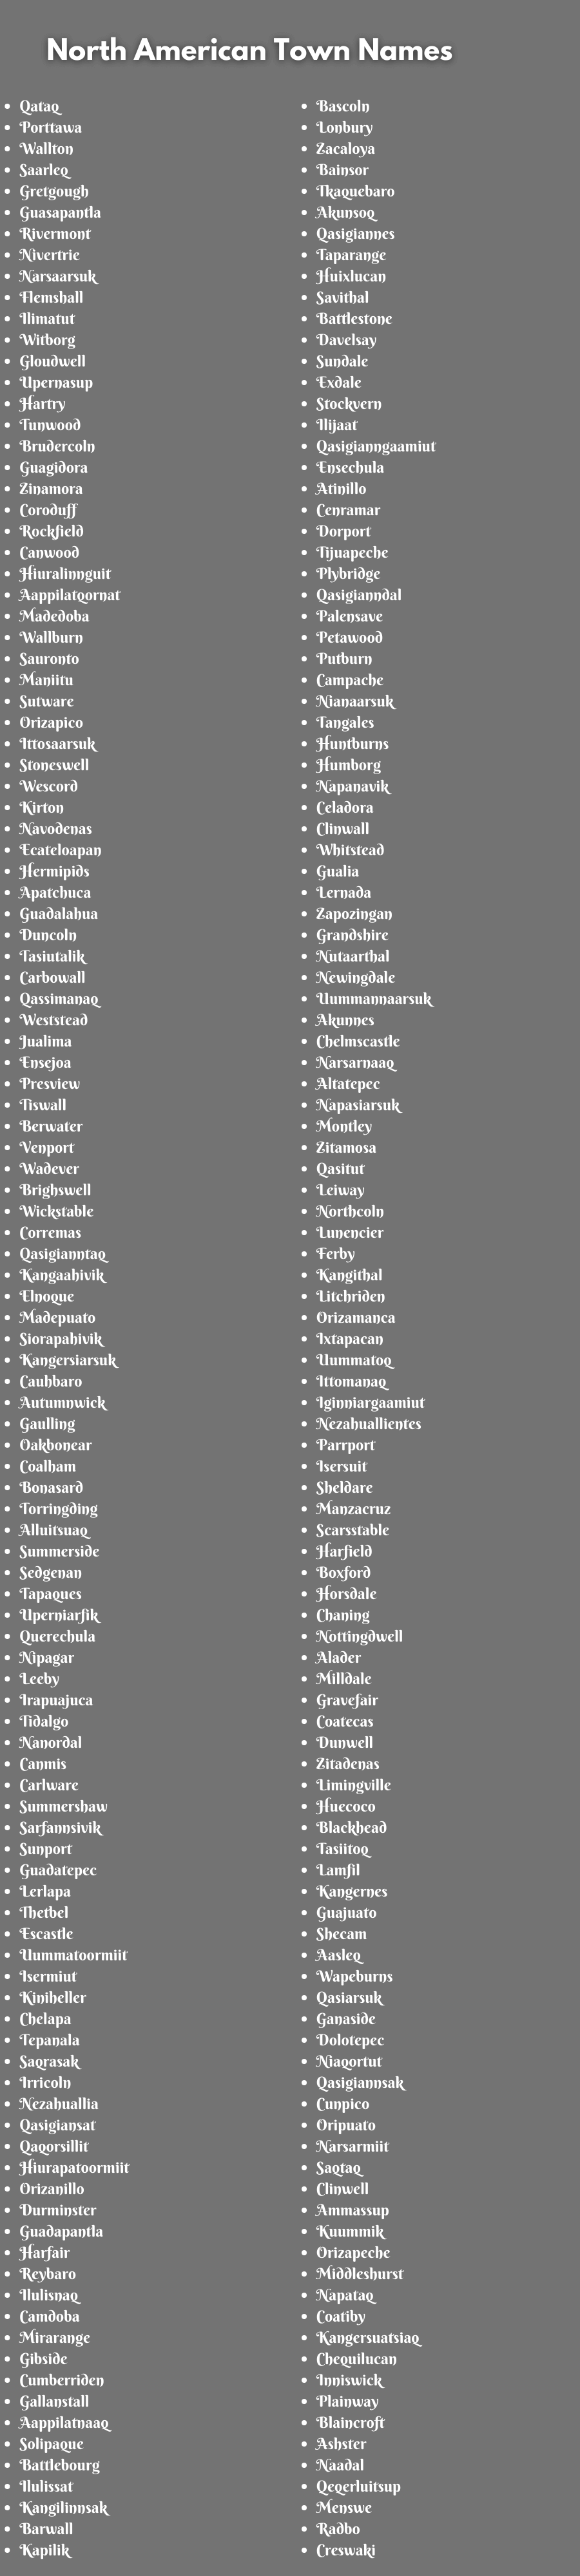 North American Town Names